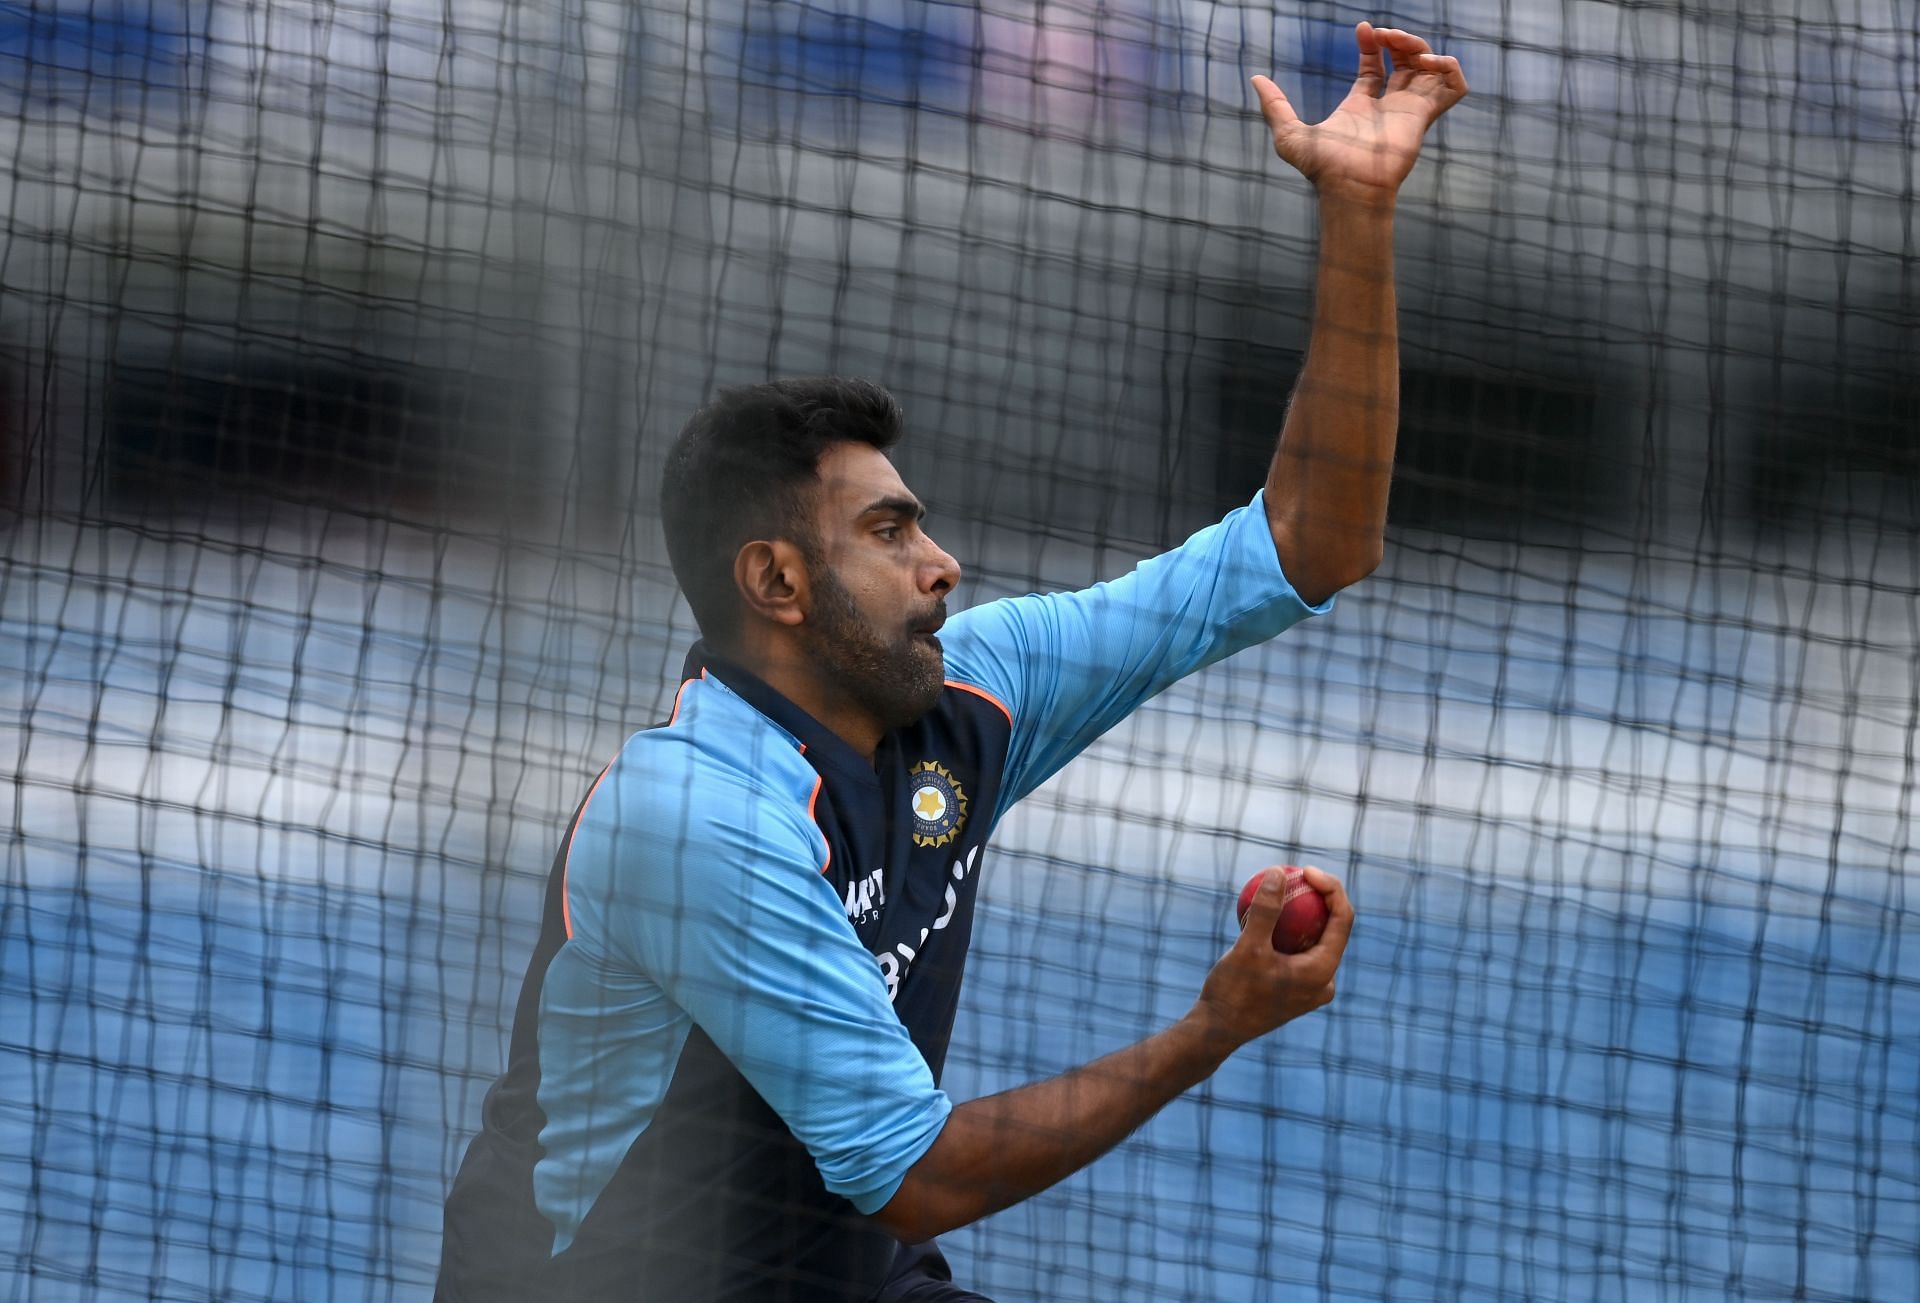 Ravichandran Ashwin performed well in the warm-up match against Australia